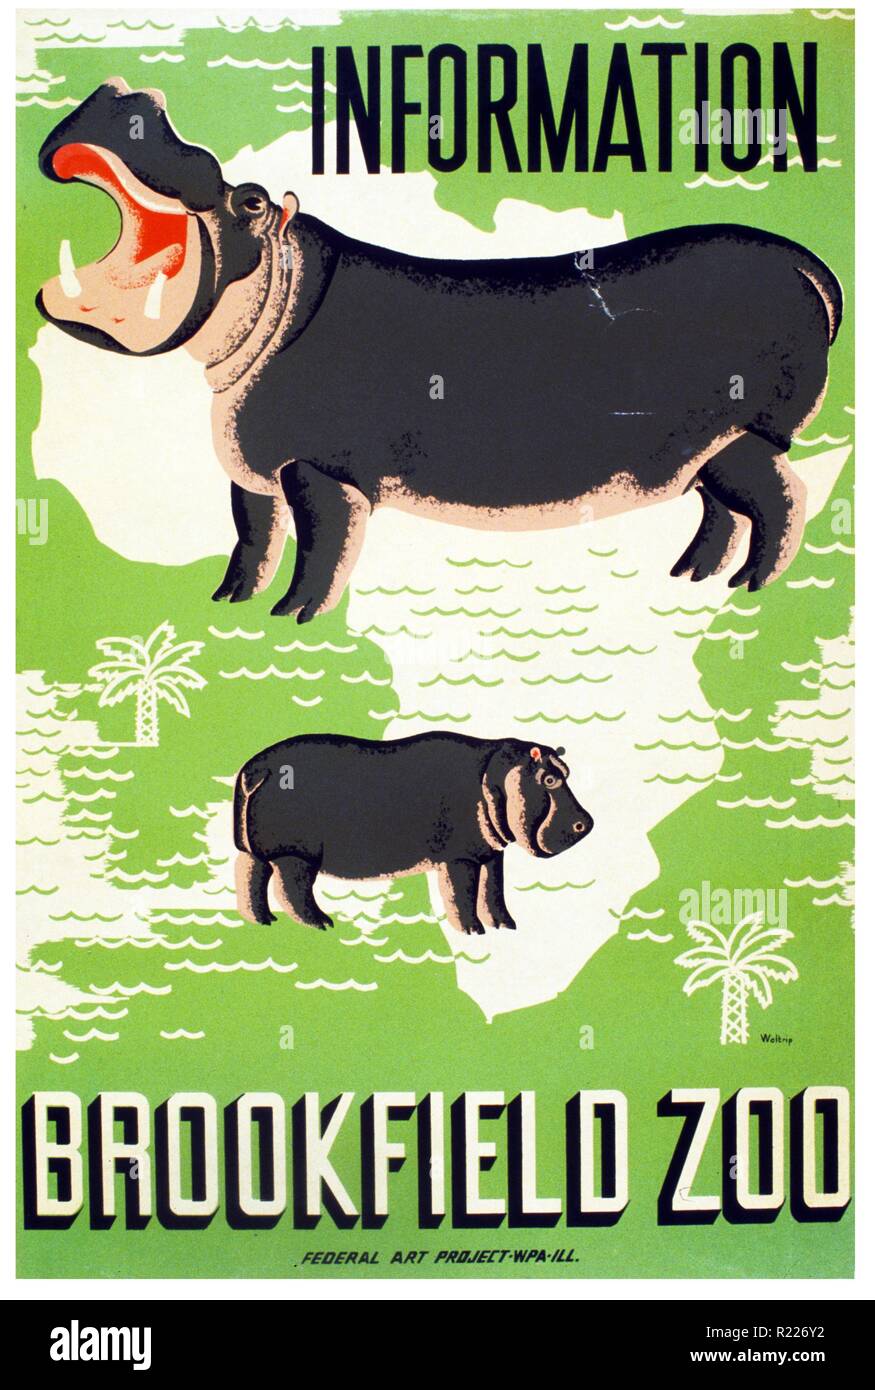 American depression era poster for Brookfield Zoo; by Mildred Waltrip, for the US Federal Art Project, 1938 Stock Photo